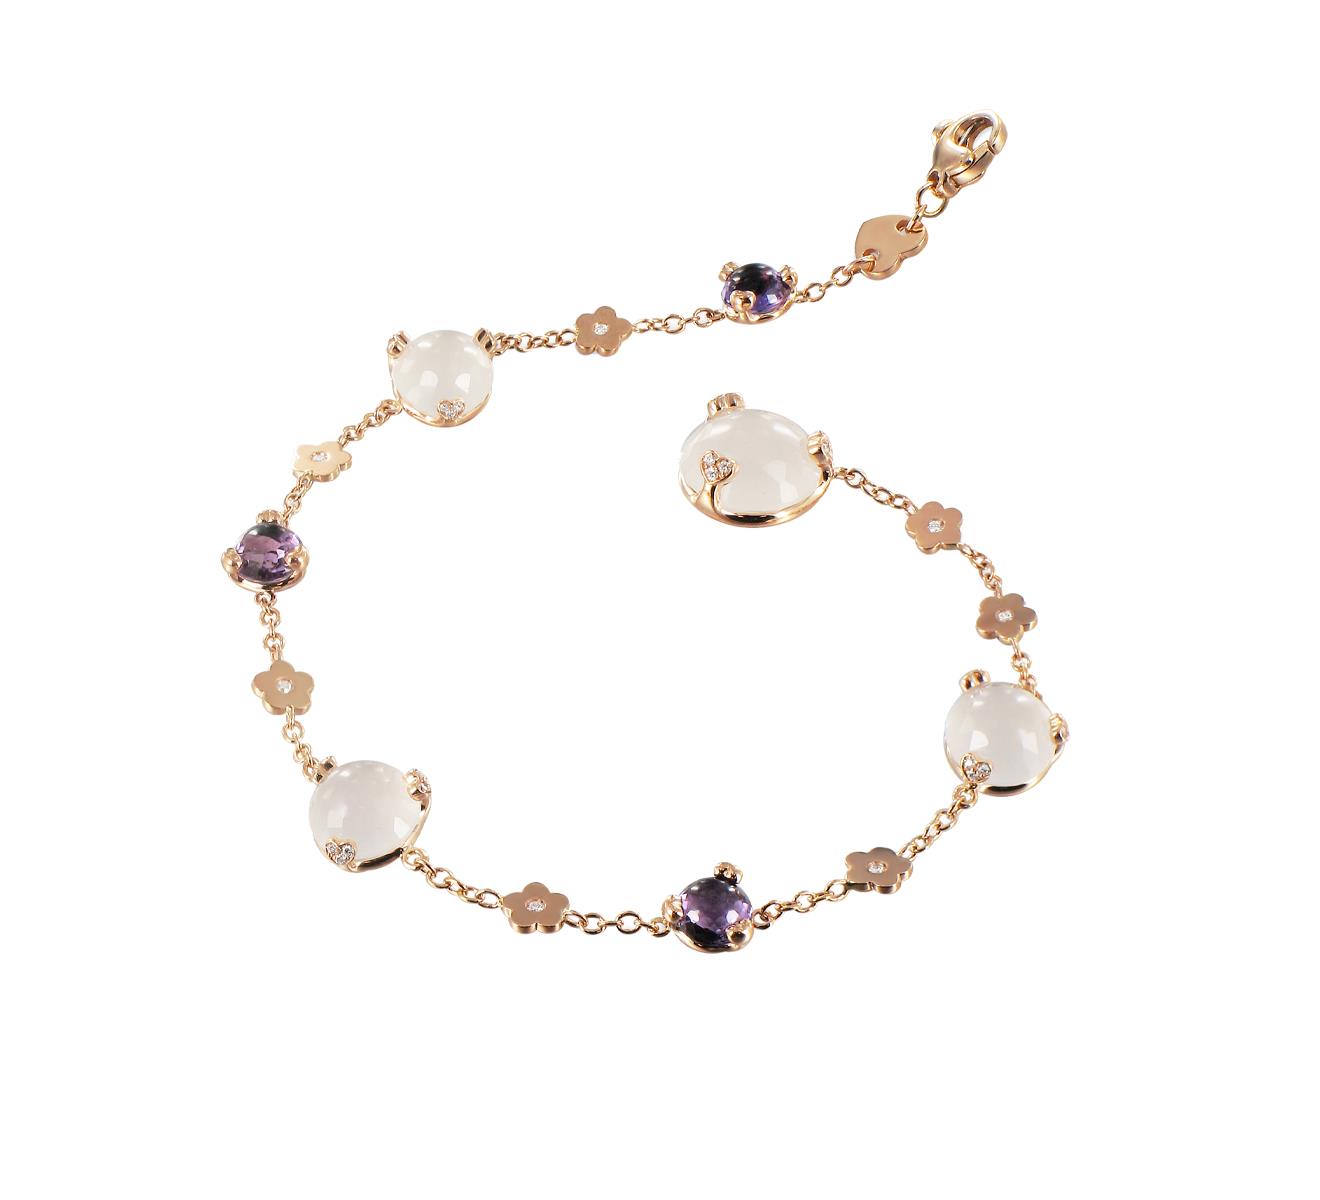 Fiore Sissi collection bracelet with amethyst and quartz - PASQUALE BRUNI